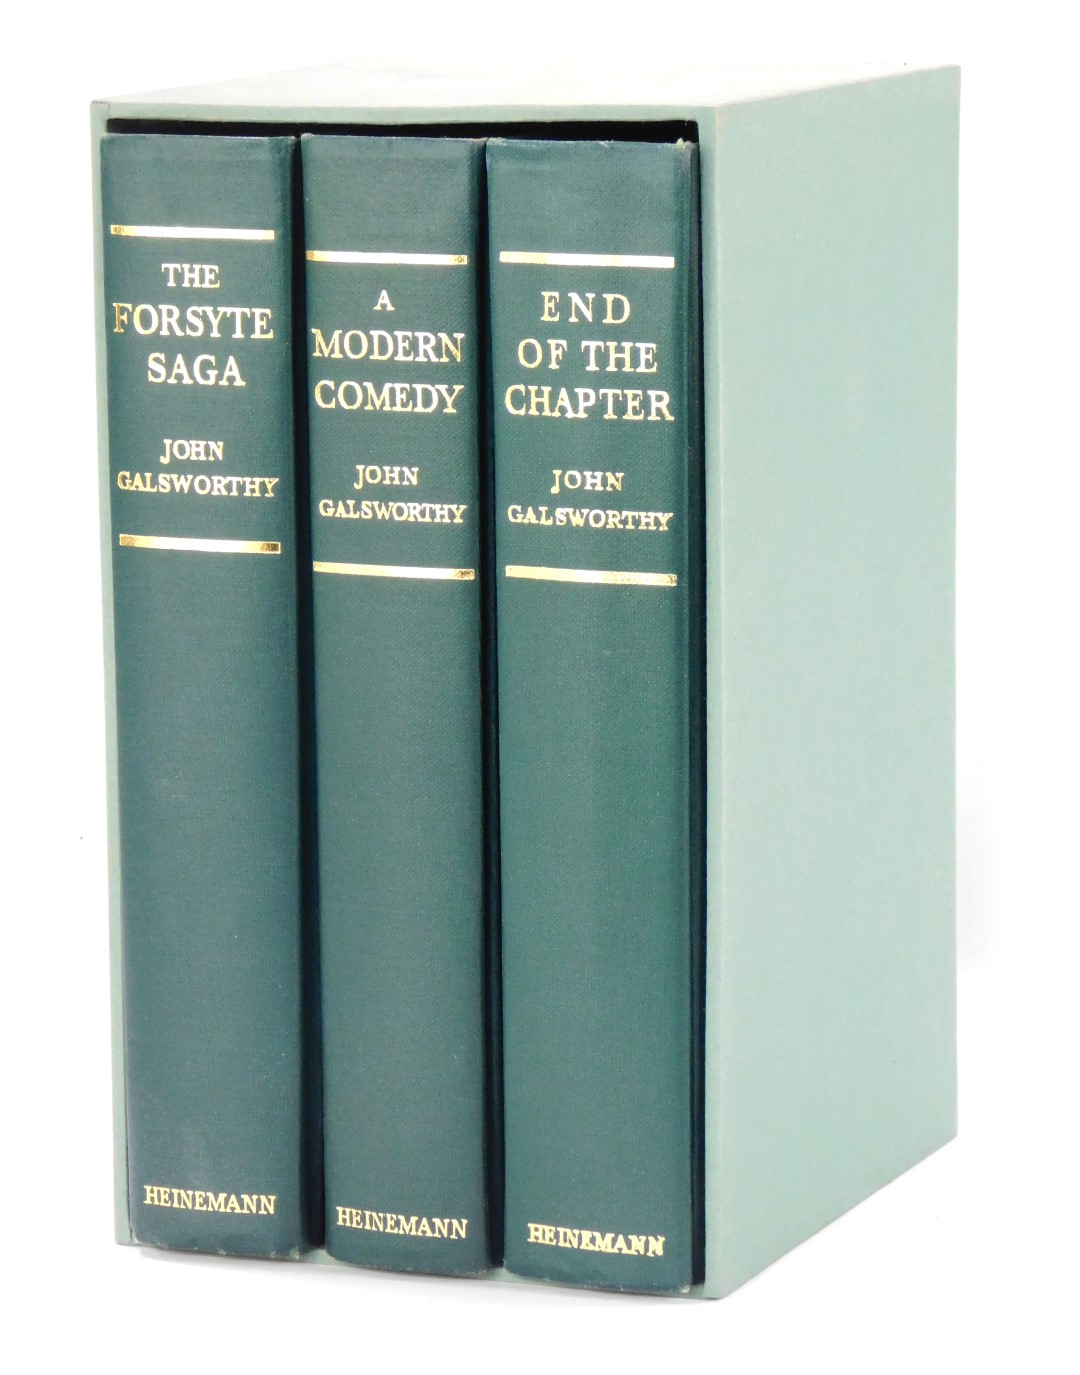 Galsworthy (John). The Forsyte Saga, A Modern Comedy and End of the Chapter, 3 volumes in slip case